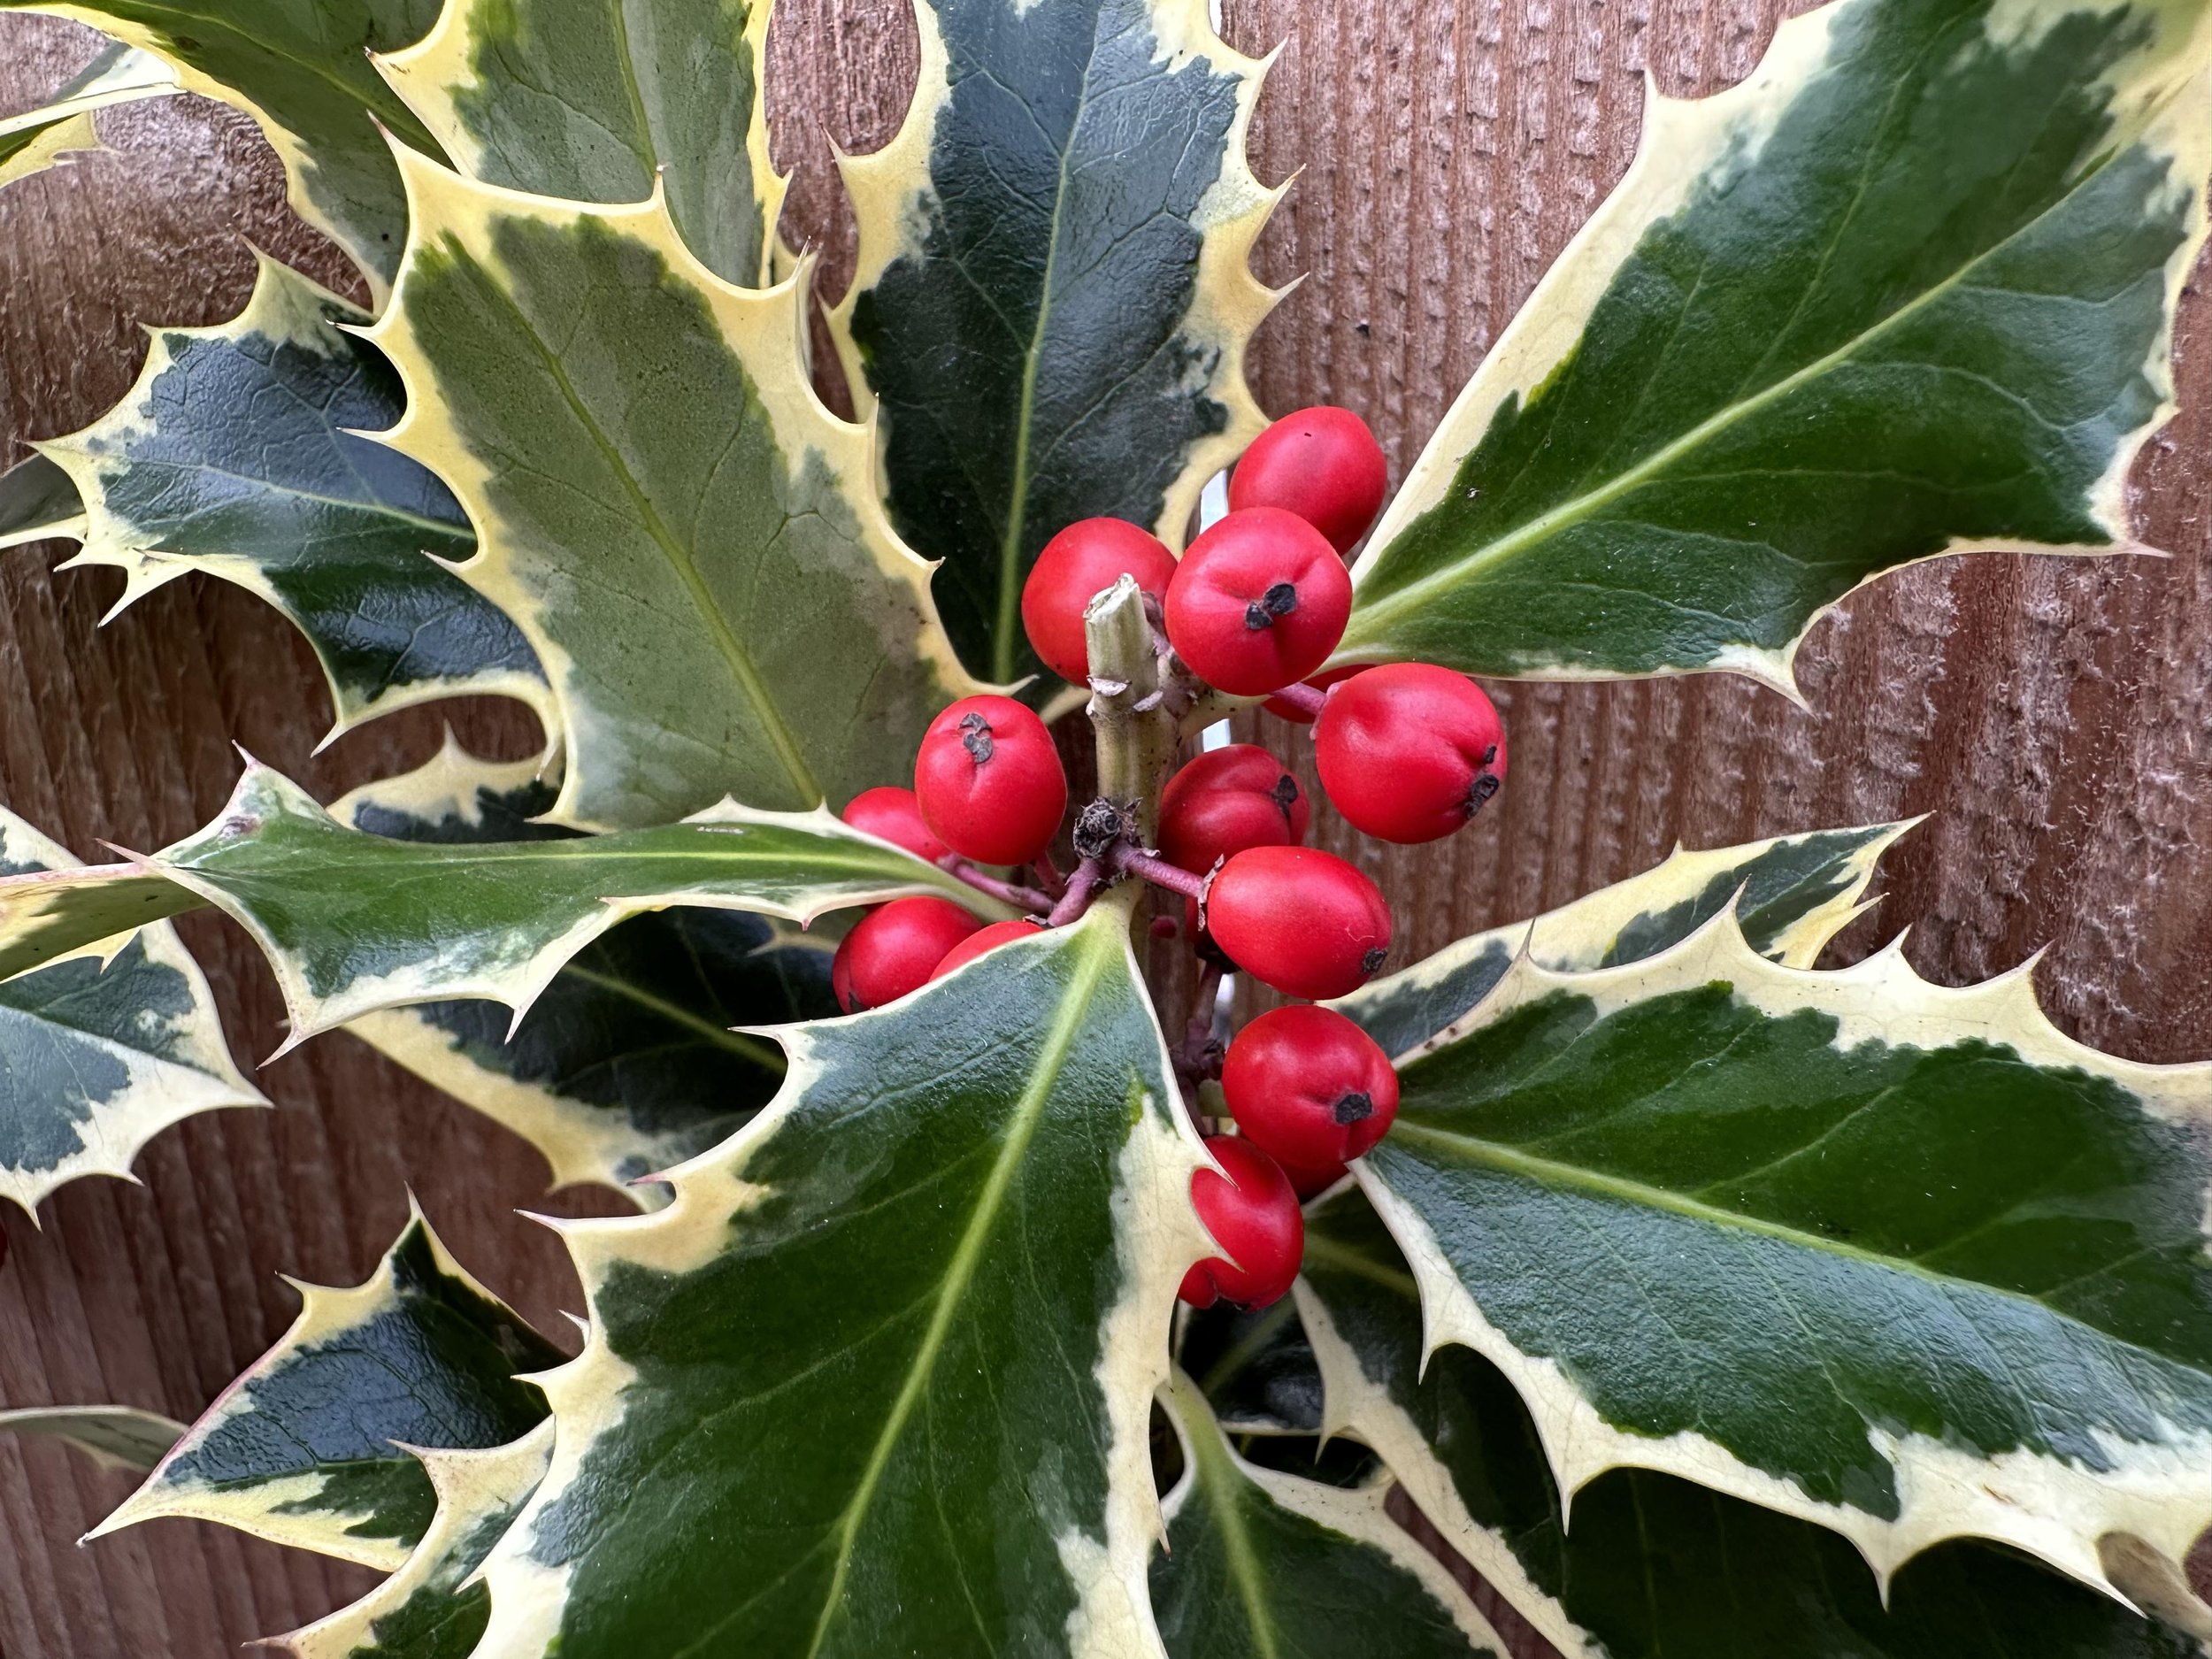 variegated holly bunches up close2.jpg